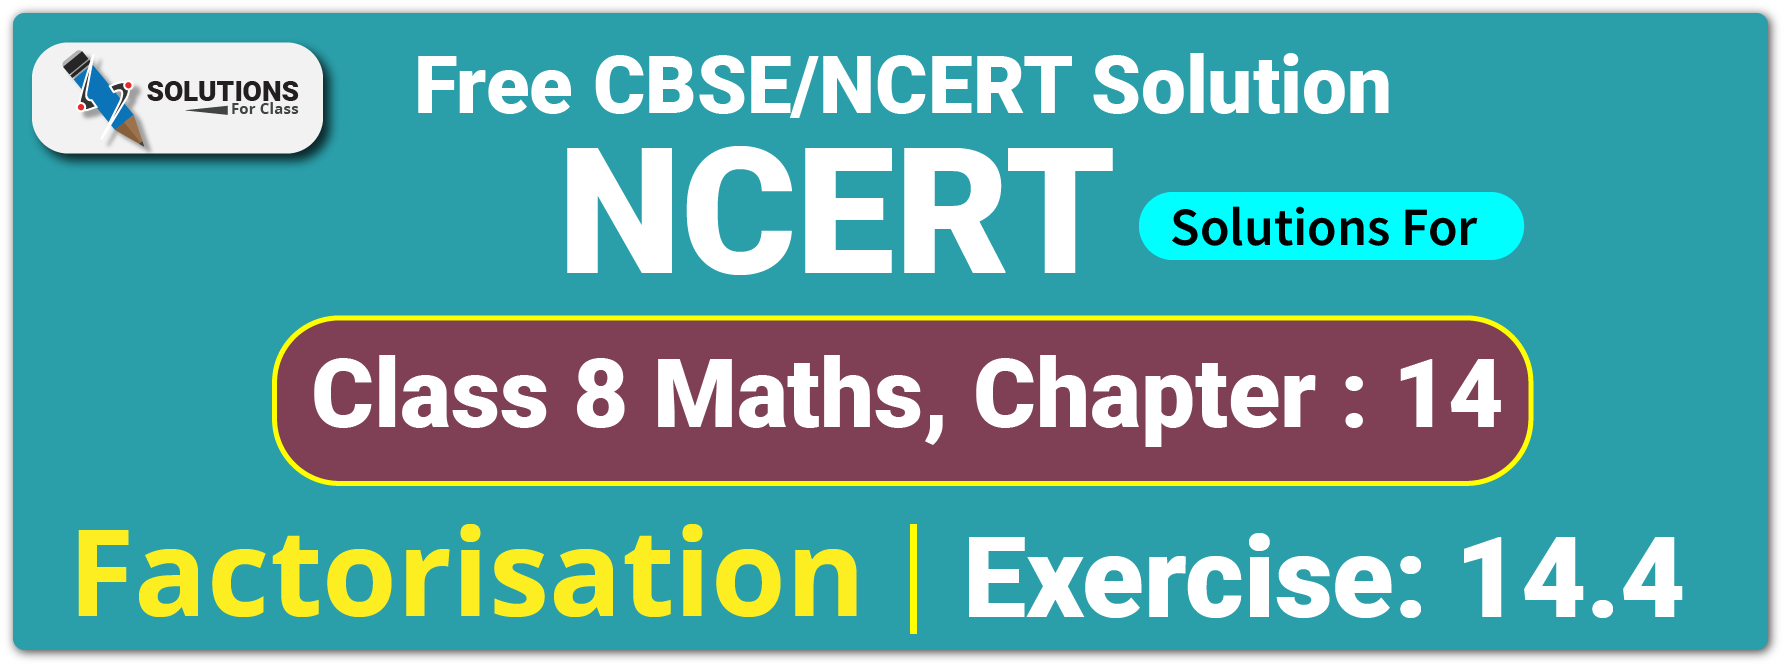 NCERT Solutions For Class 8 Chapter 14, Factorisation, Exercise14.4